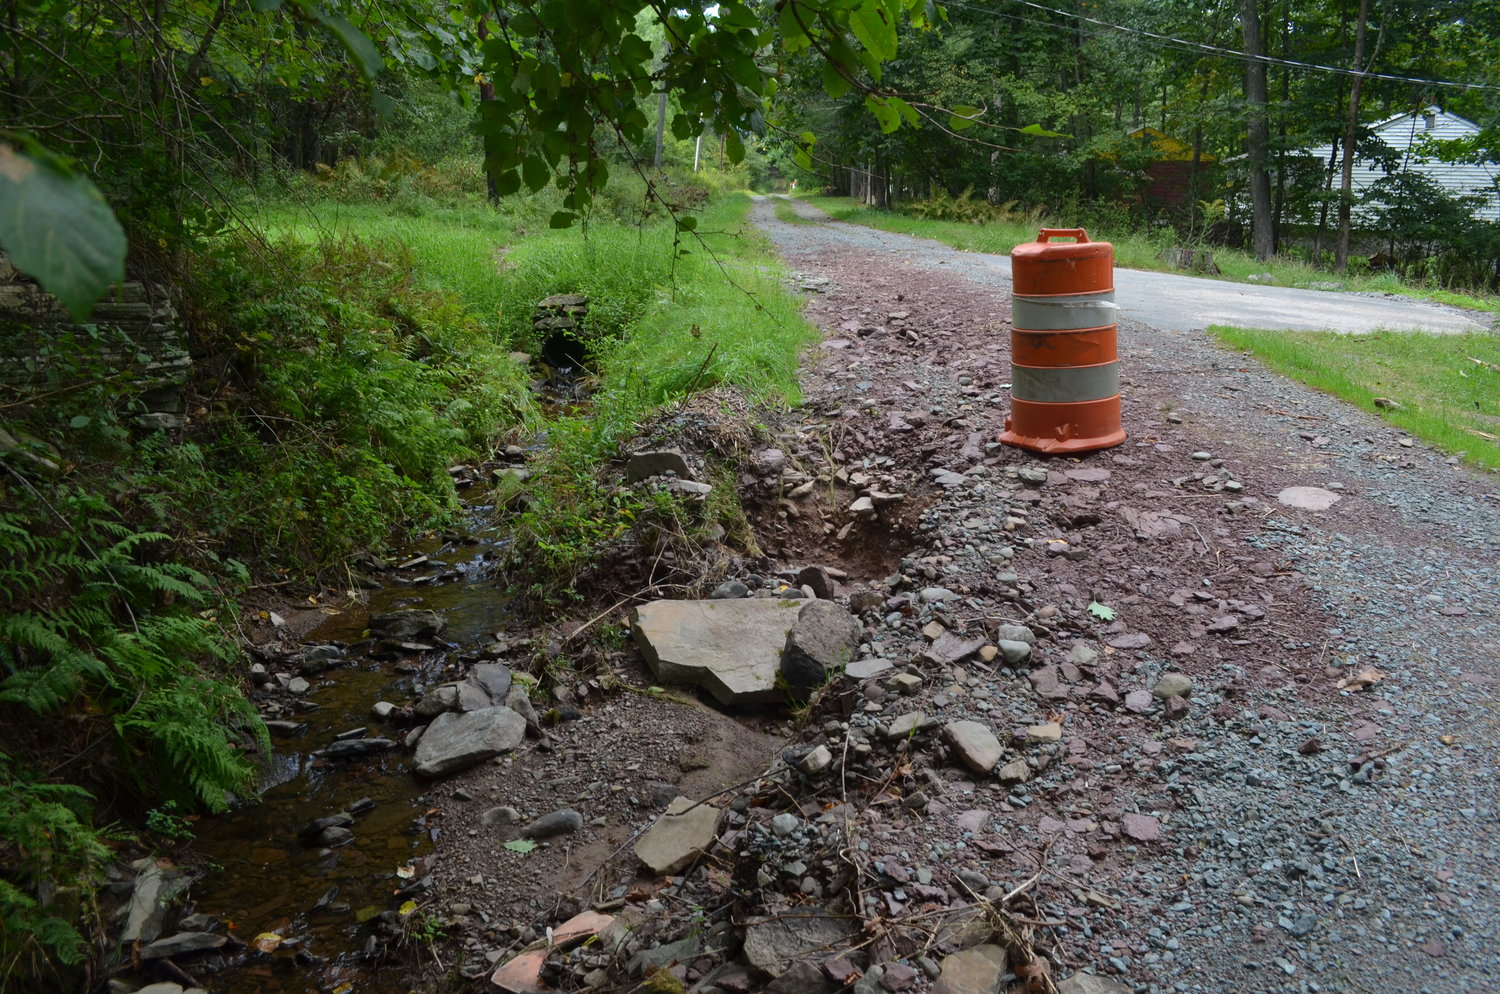 The damage caused by Hurricane Ida to Luxton Lake's roads.